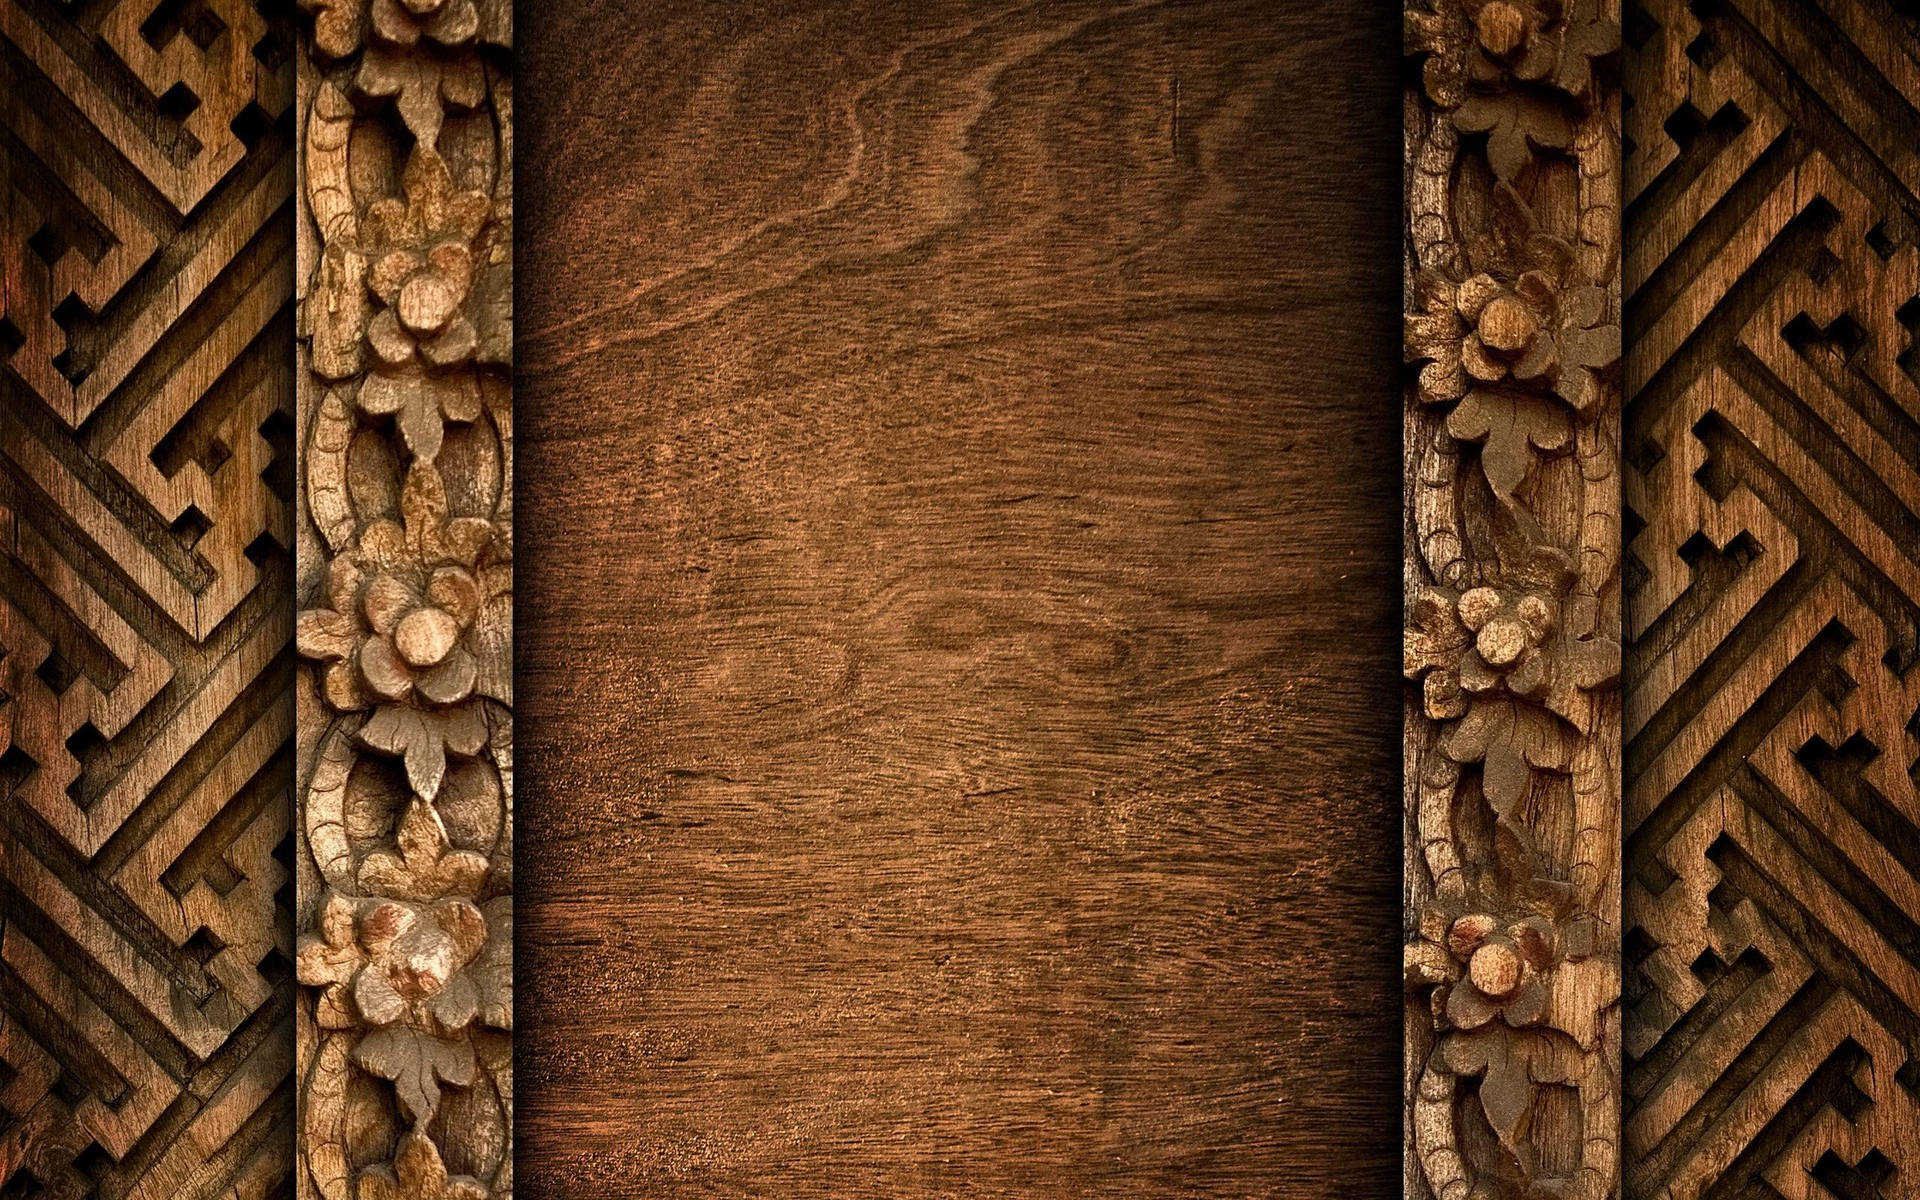 Ornate Wood Texture Background